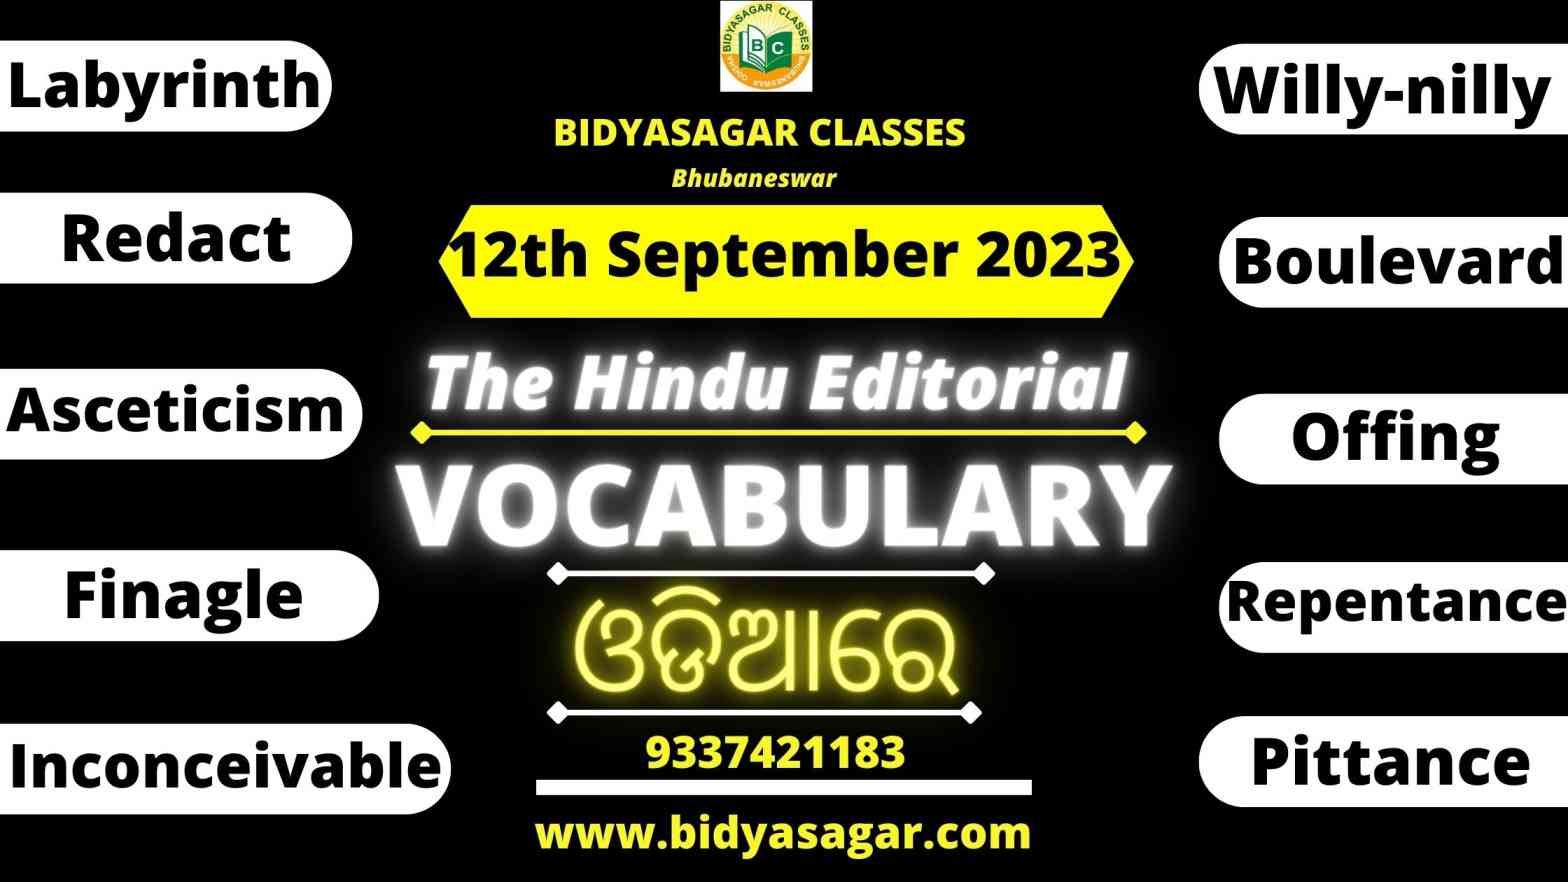 The Hindu Editorial Vocabulary of 12th September 2023